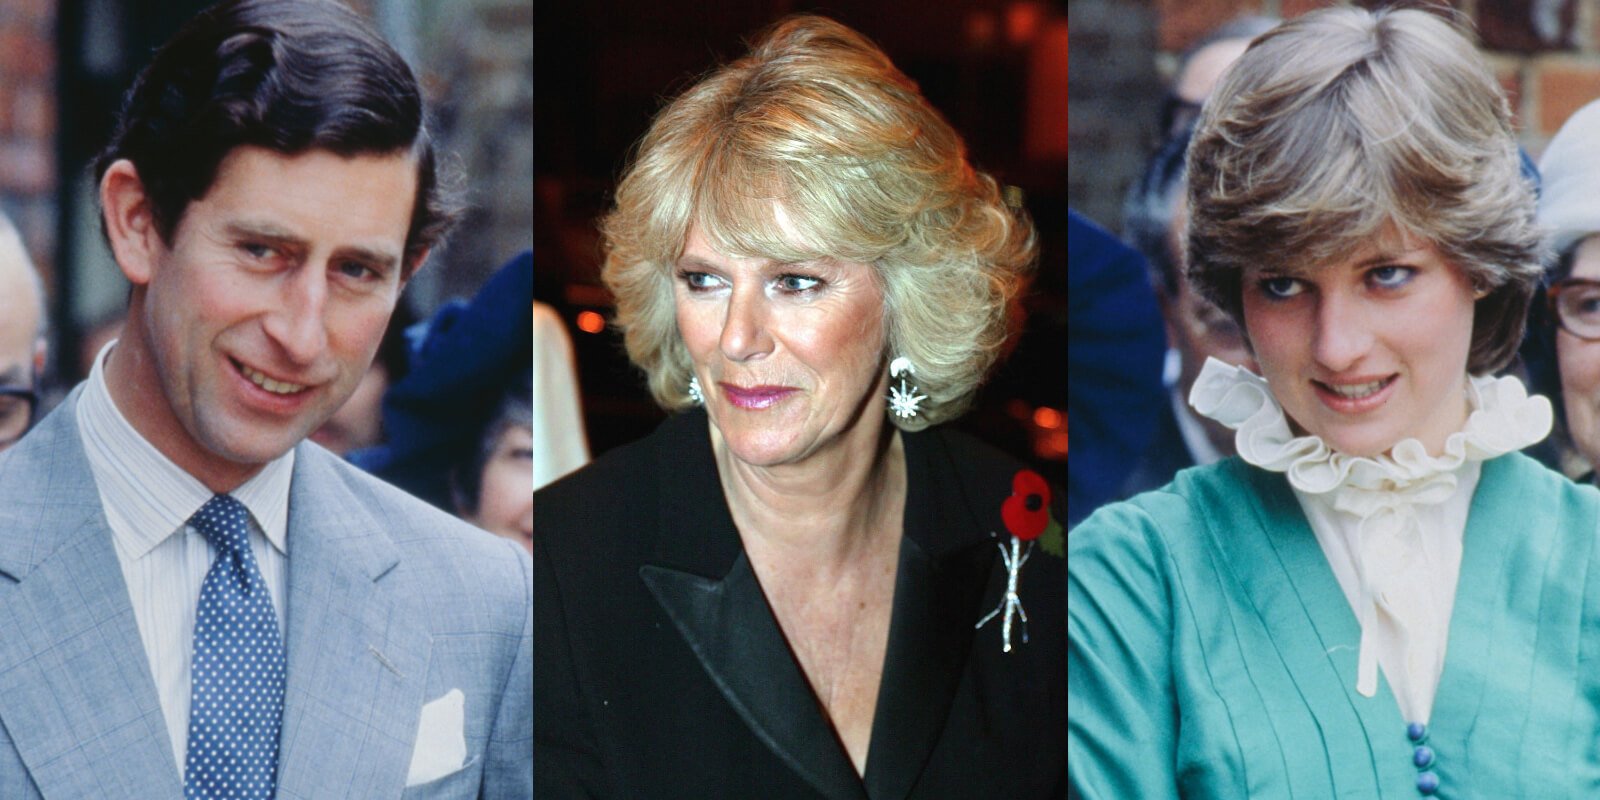 King Charles, Camilla Parker Bowles and Princess Diana in side by side photographs.